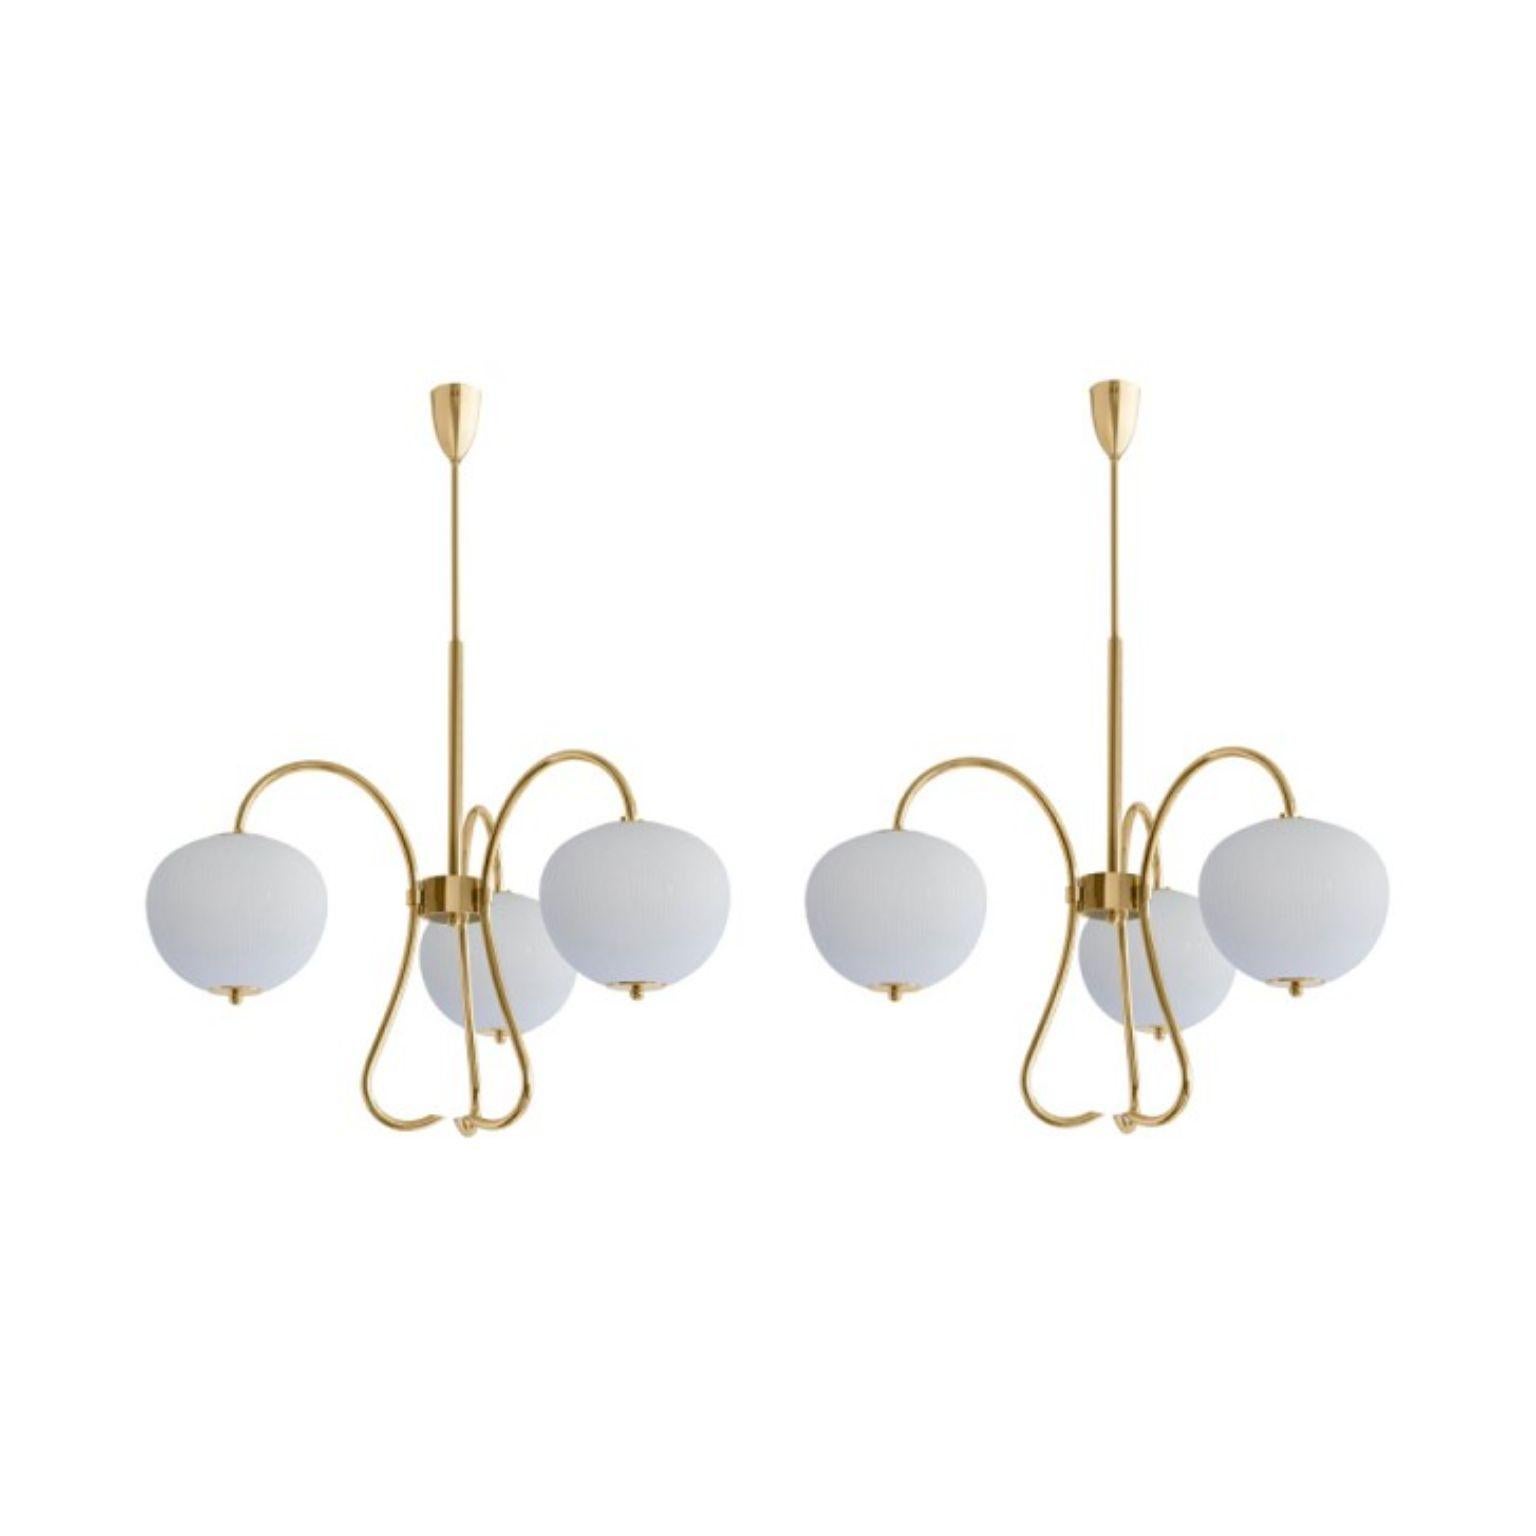 Triple chandelier china 03 by Magic Circus Editions
Dimensions: H 120 x W 81.5 x D 26.2 cm
Materials: Brass, mouth blown glass sculpted with a diamond saw
Colour: rich grey

Available finishes: Brass, nickel
Available colours: enamel soft